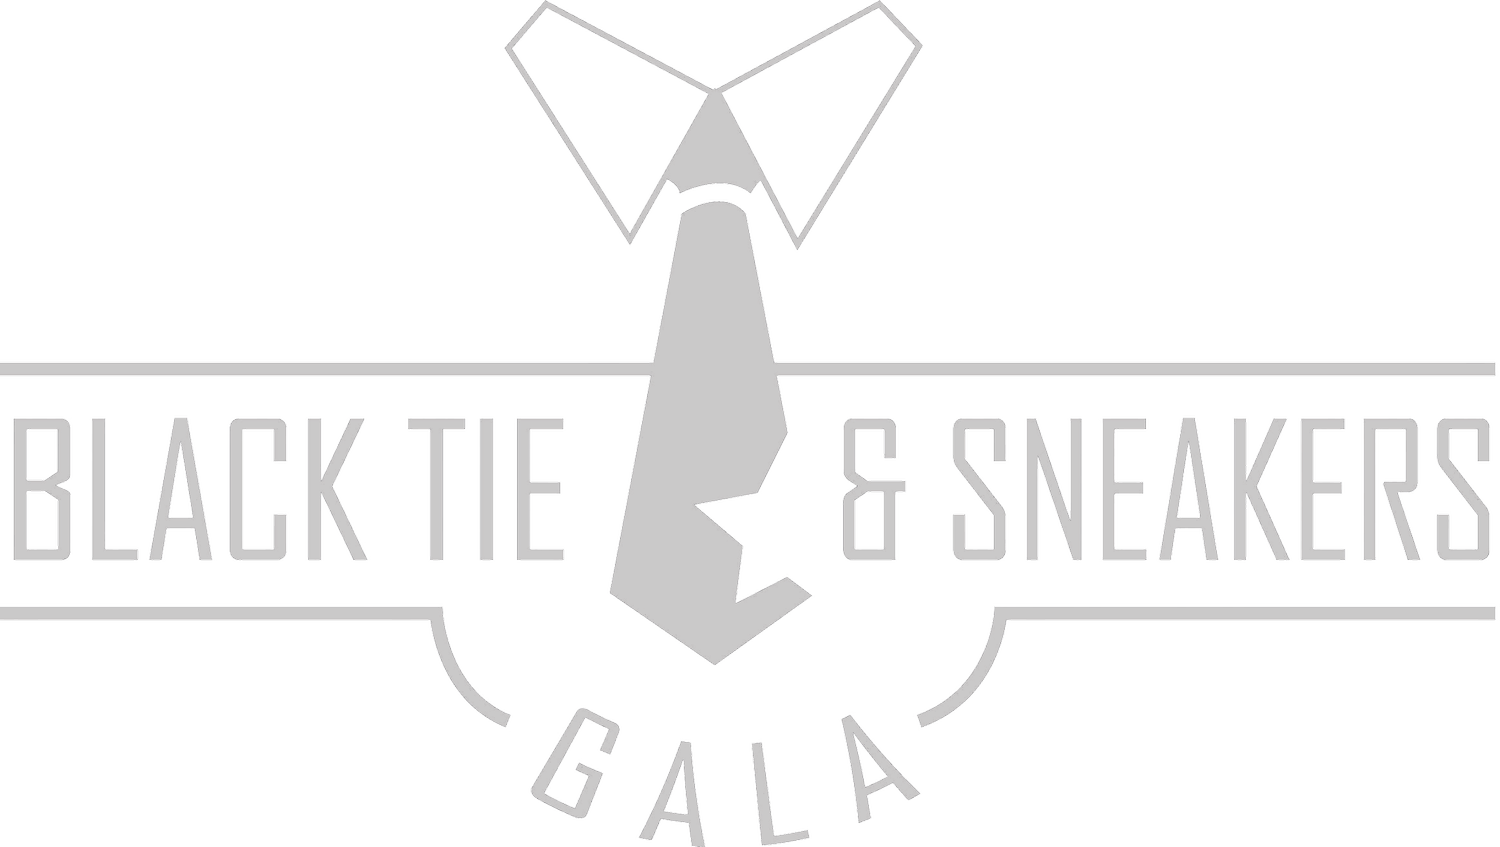 The Black Tie and Sneakers Gala